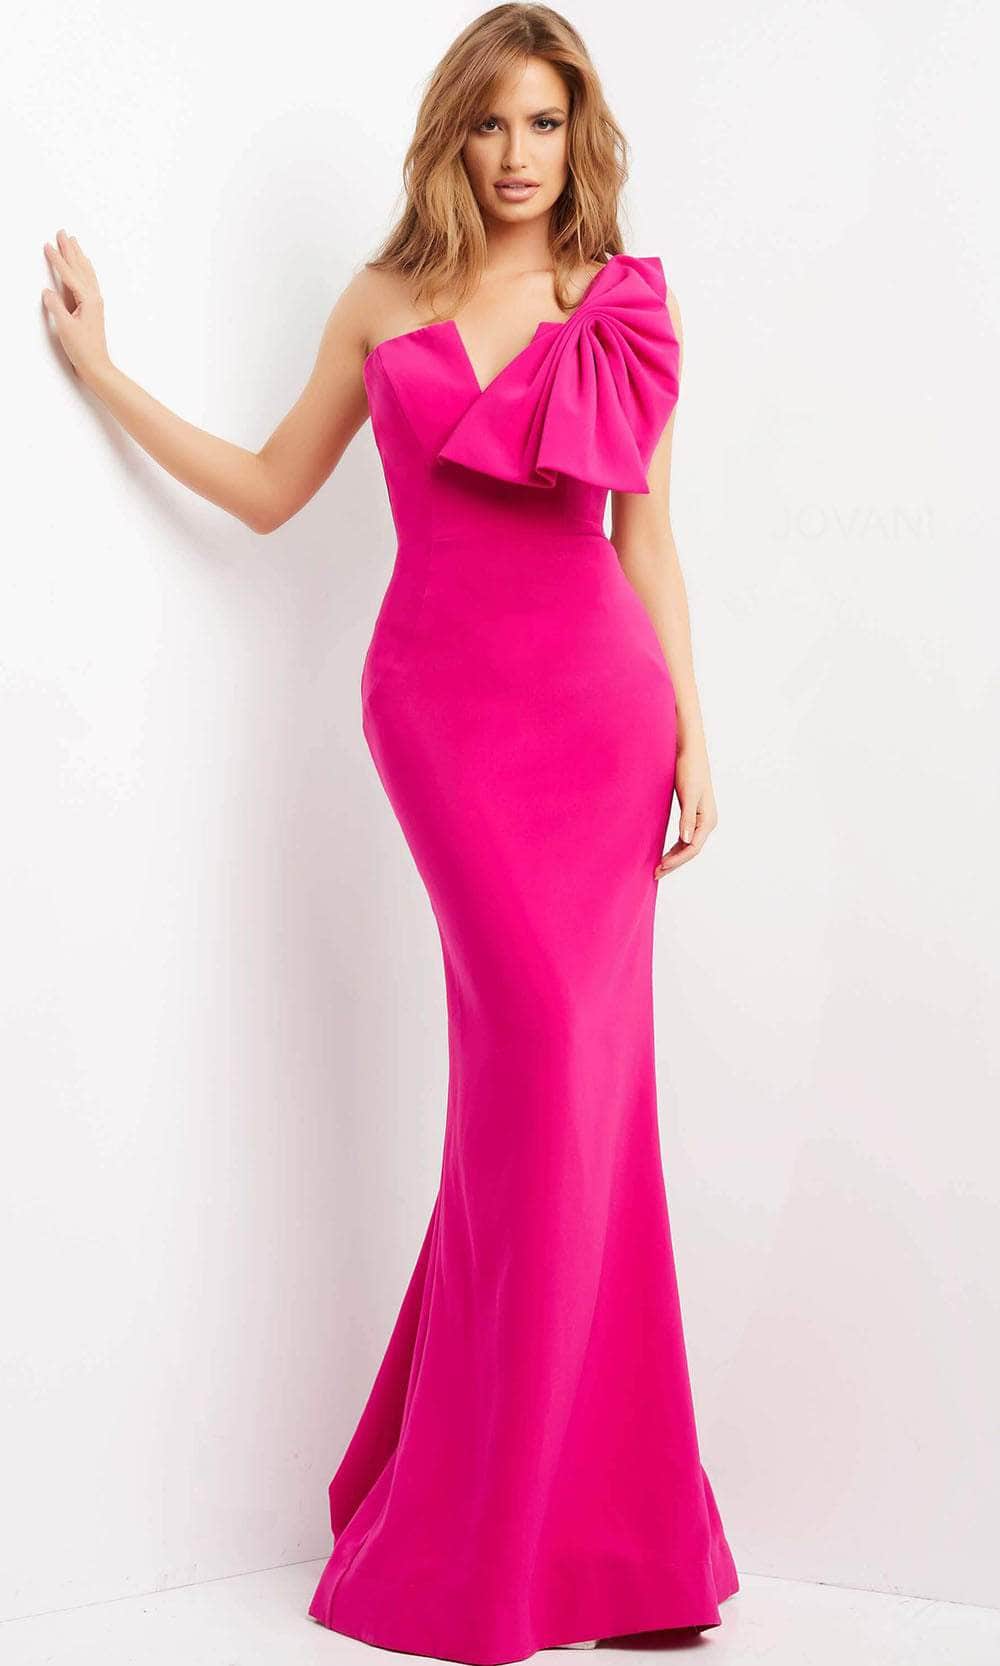 Jovani 07306 - Bow Accented Mermaid Evening Dress
